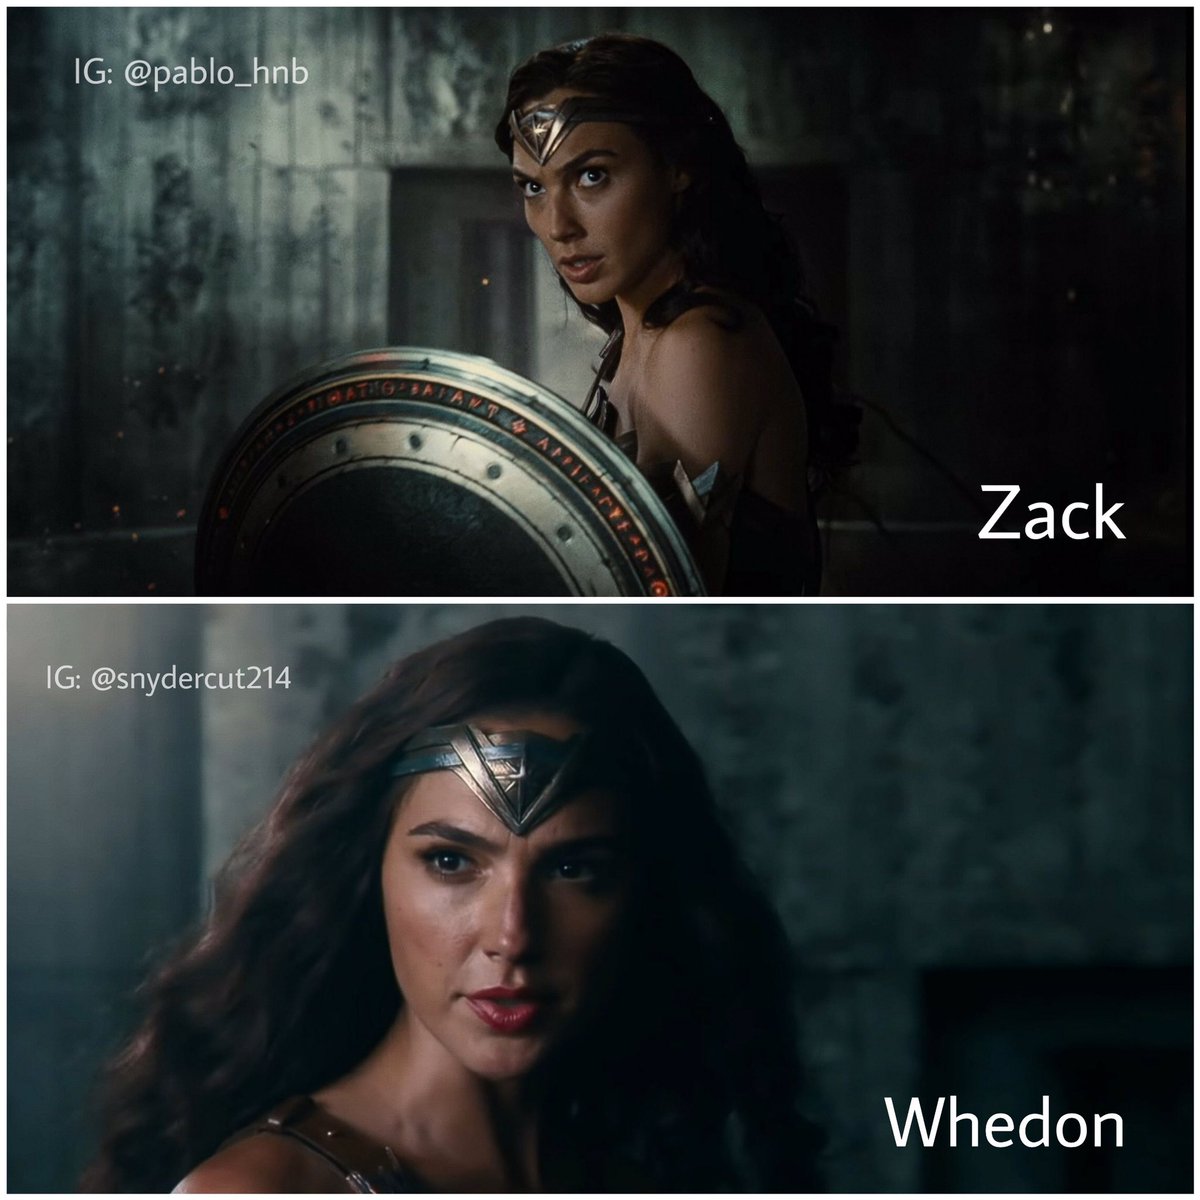 Thread: Comparisons between Zack Snyder’s vision and Joss Whedon’s work. @justiceleaguewb vs  #ZackSnydersJusticeLeague  #ReleaseTheSnyderCut By  @_j4mesdean &  @PabloNaBorok